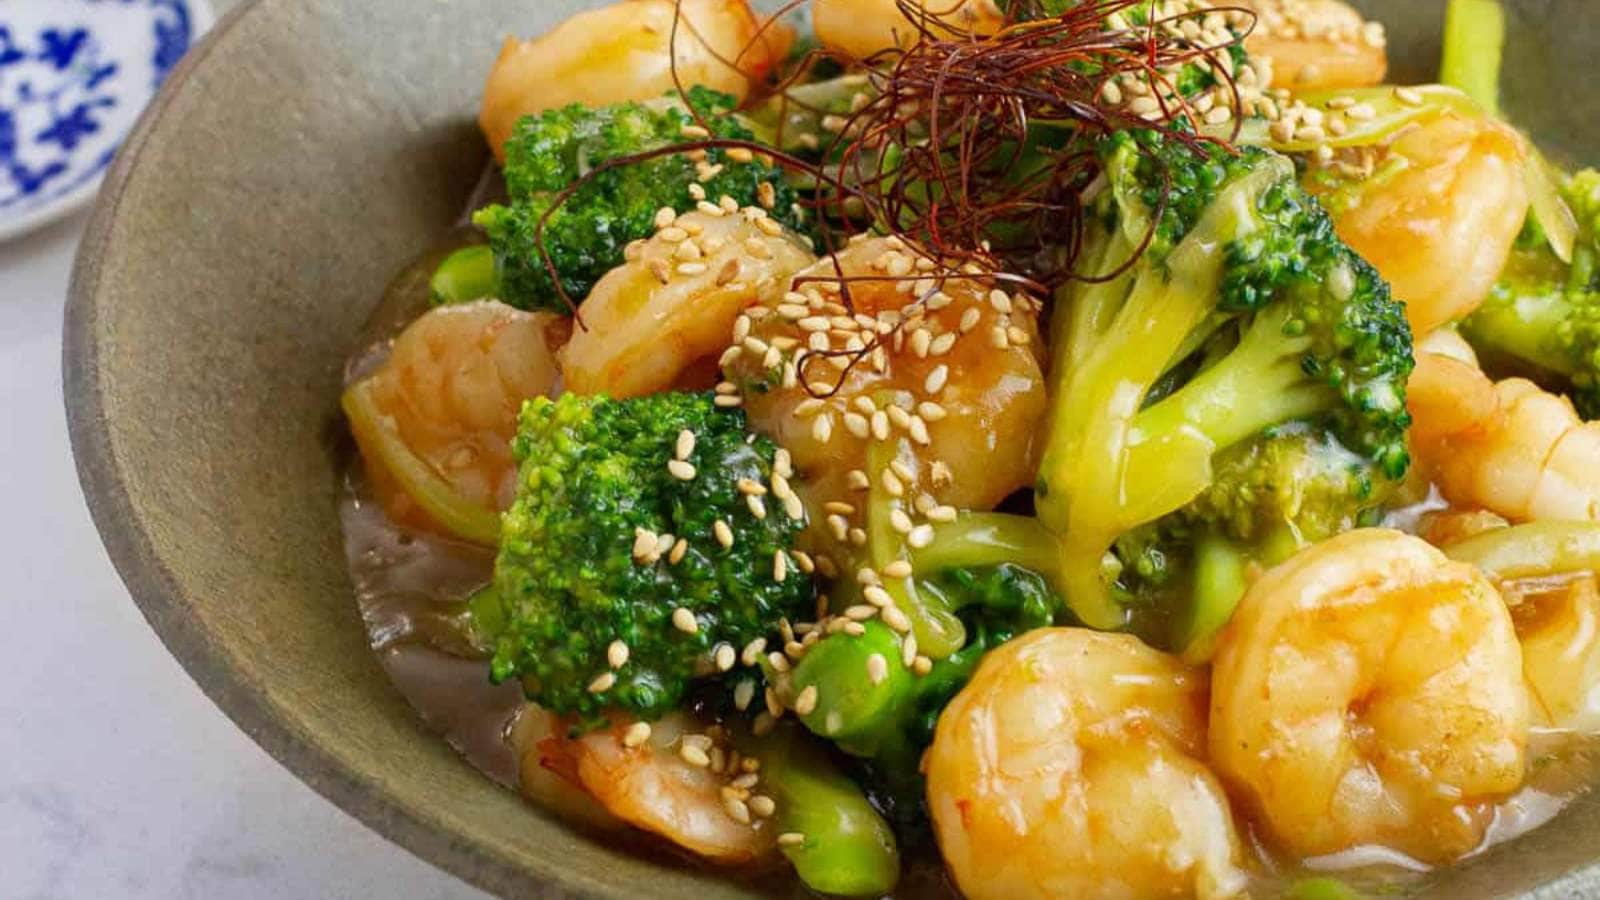 Shrimp and Broccoli recipe by Plates By Nat.